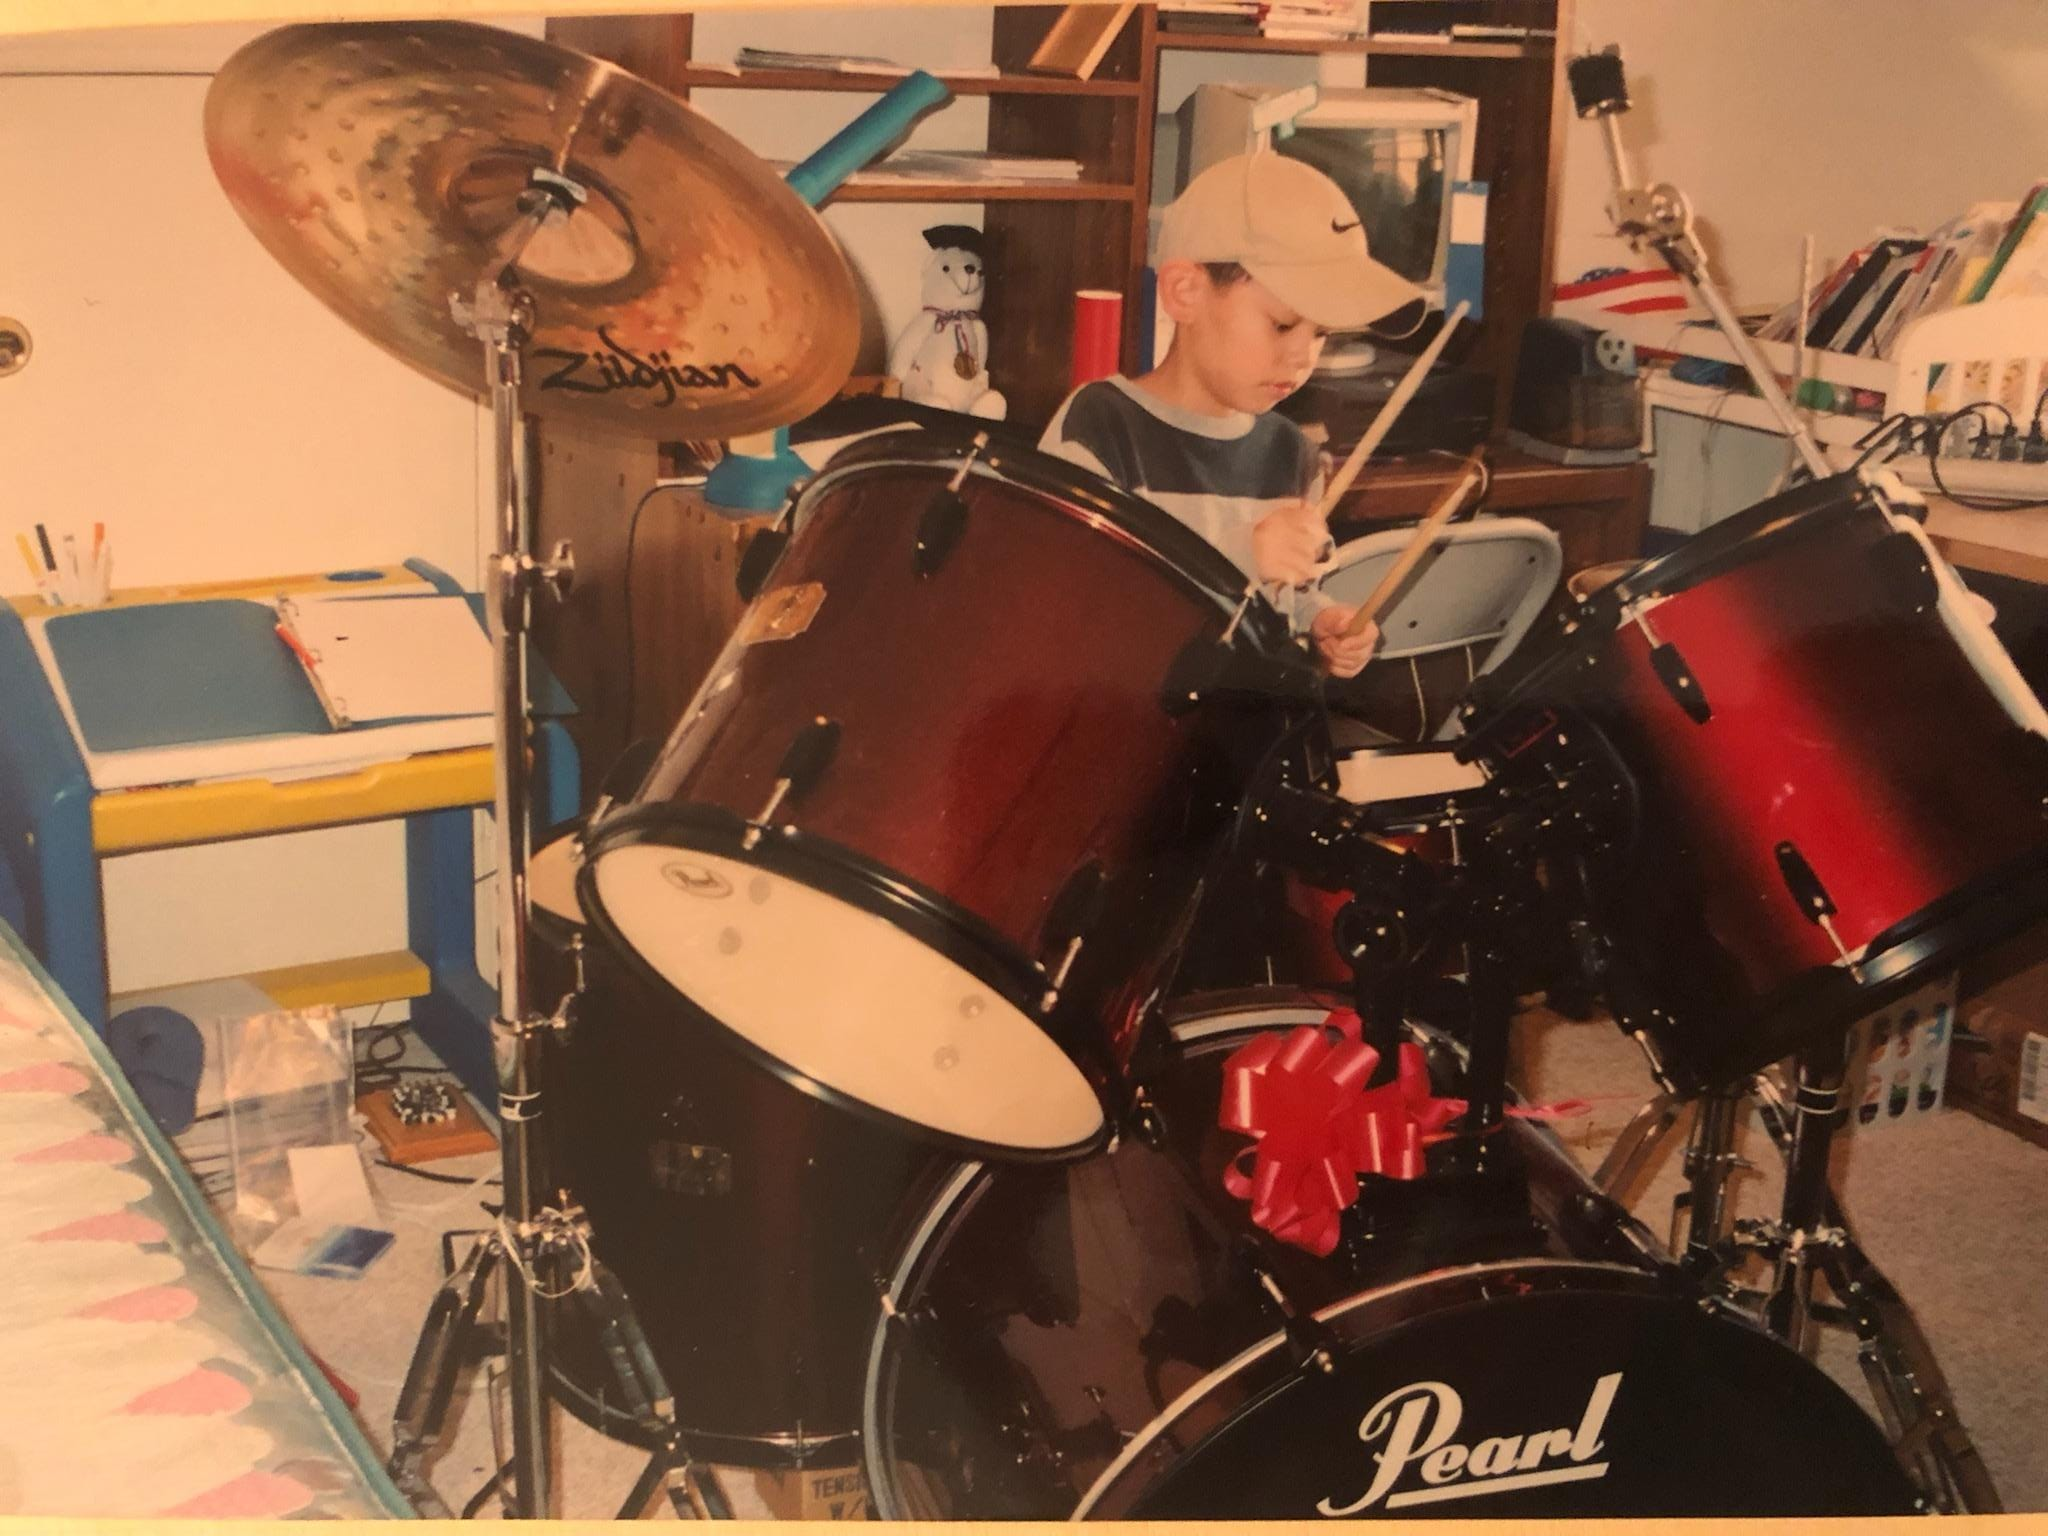 Young YJ plays on a drum set.